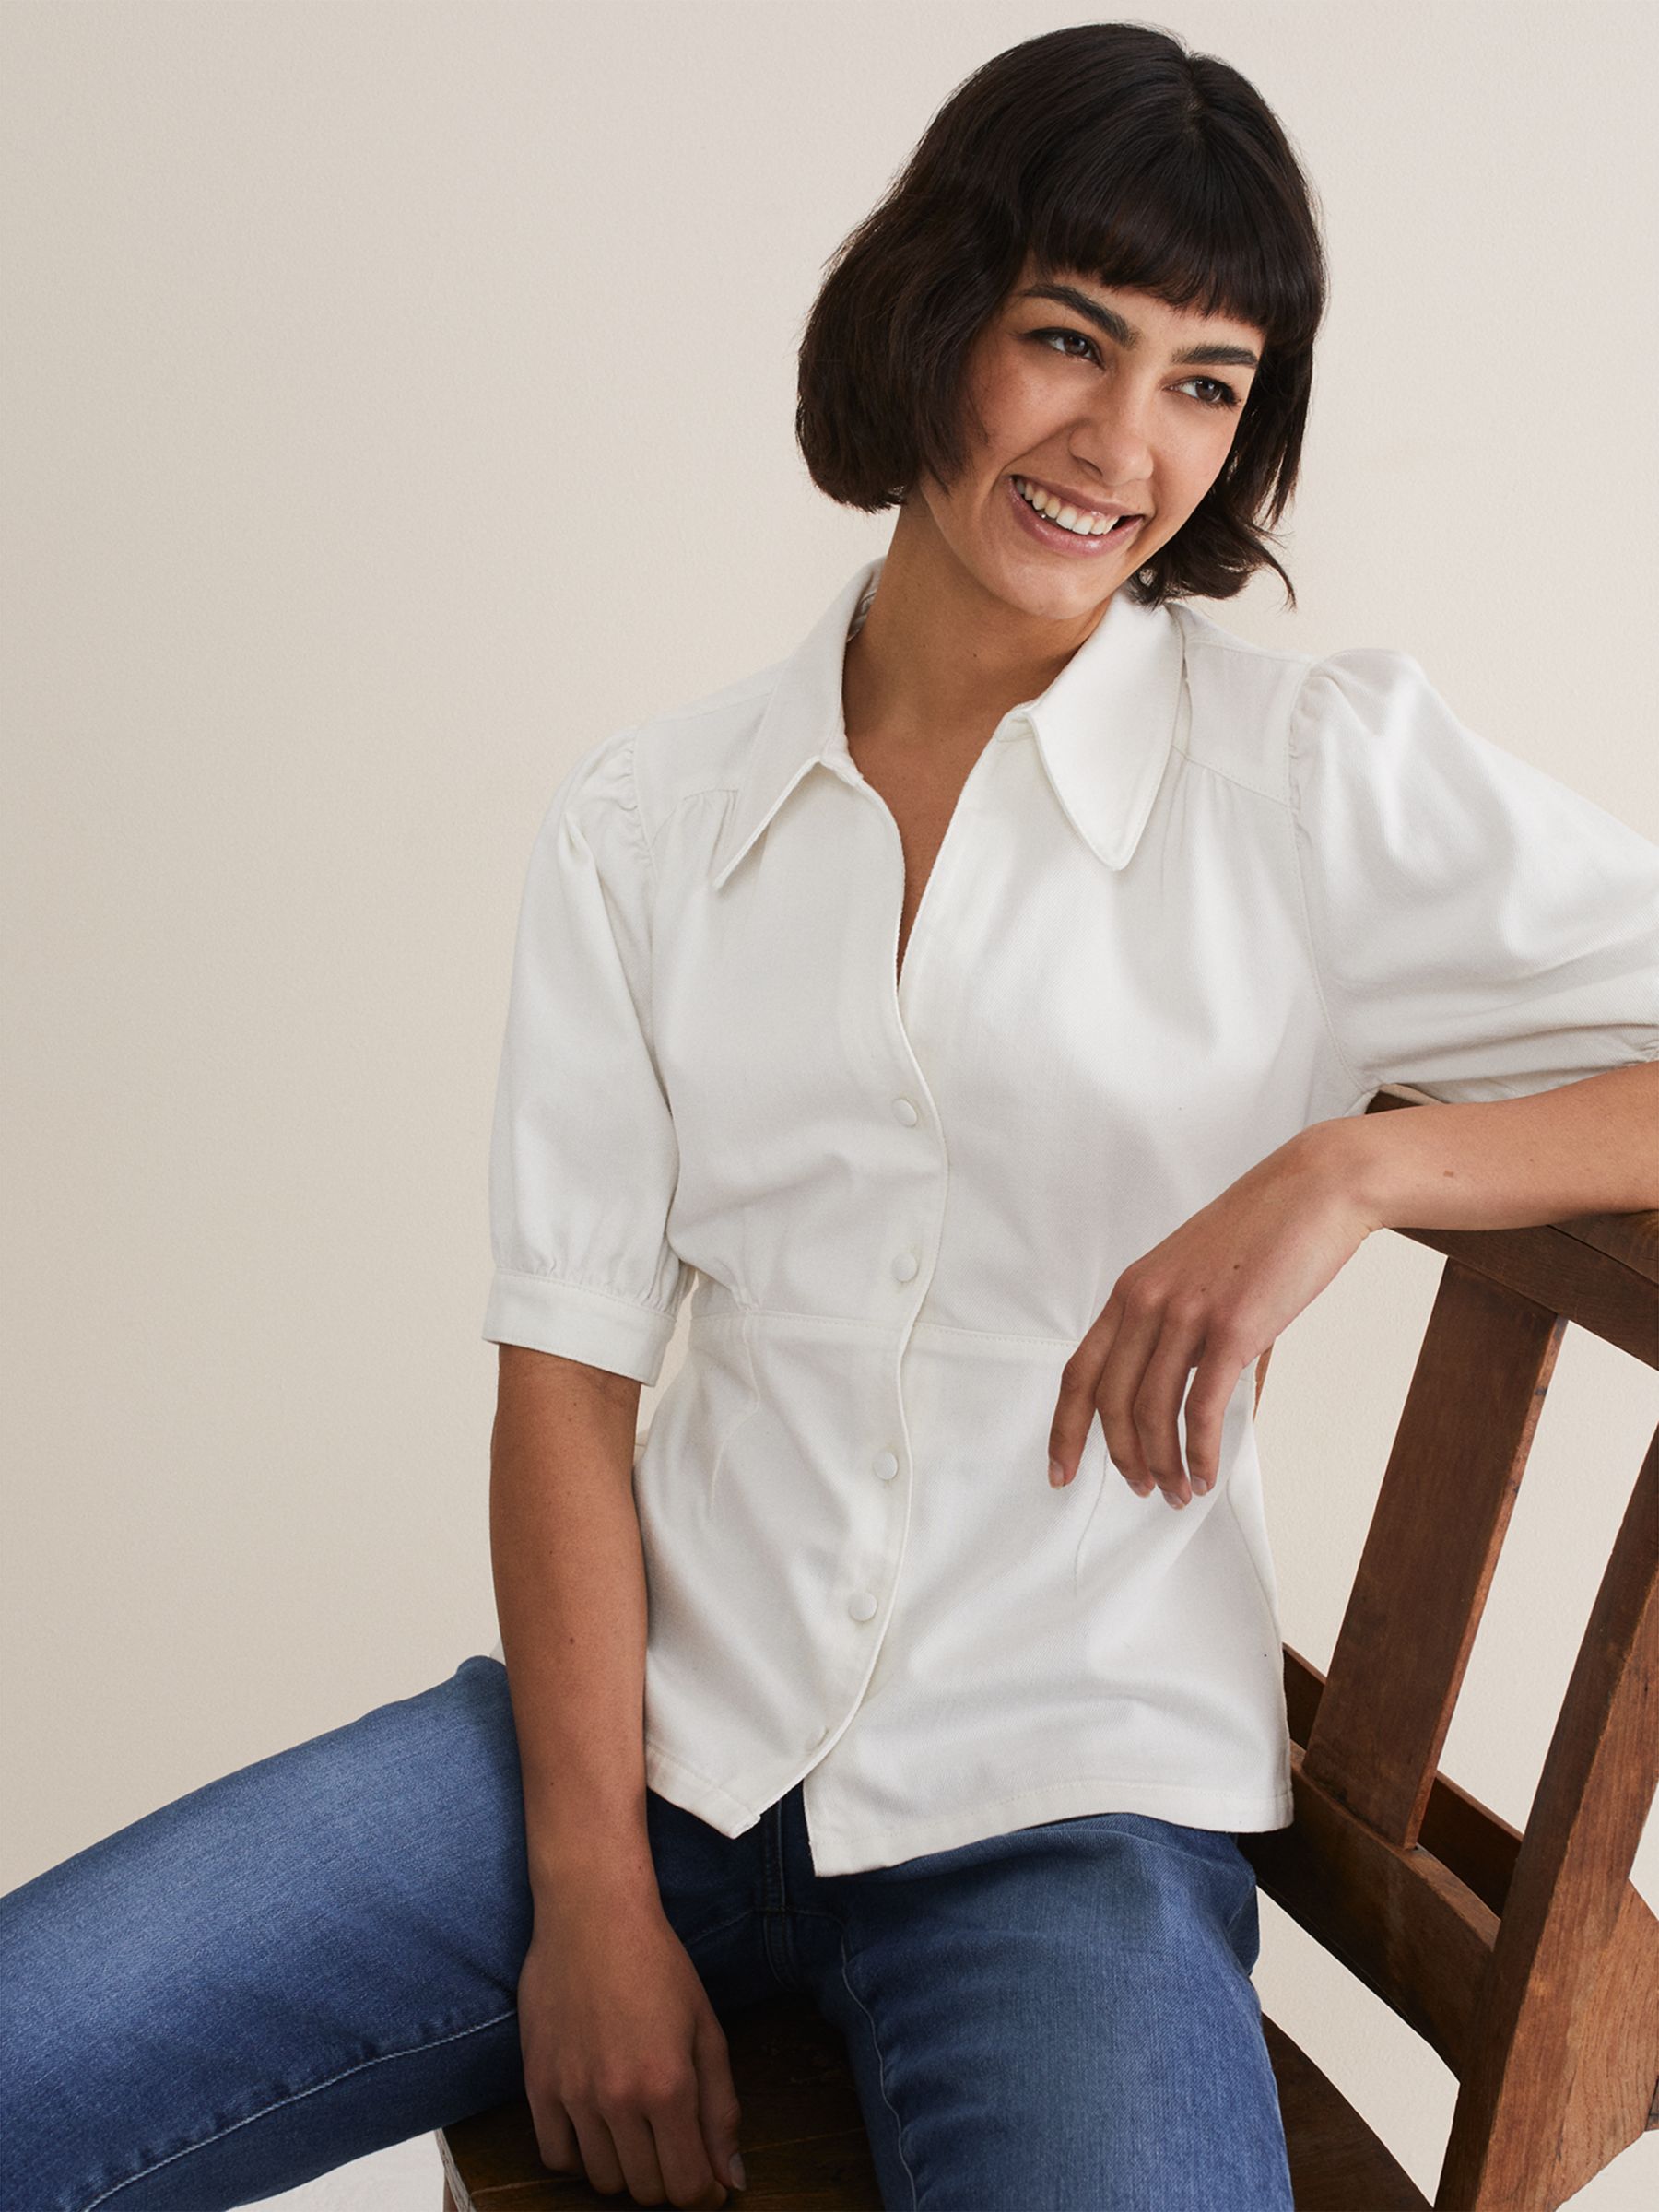 Buy Phase Eight Cosette Denim Top, White Online at johnlewis.com